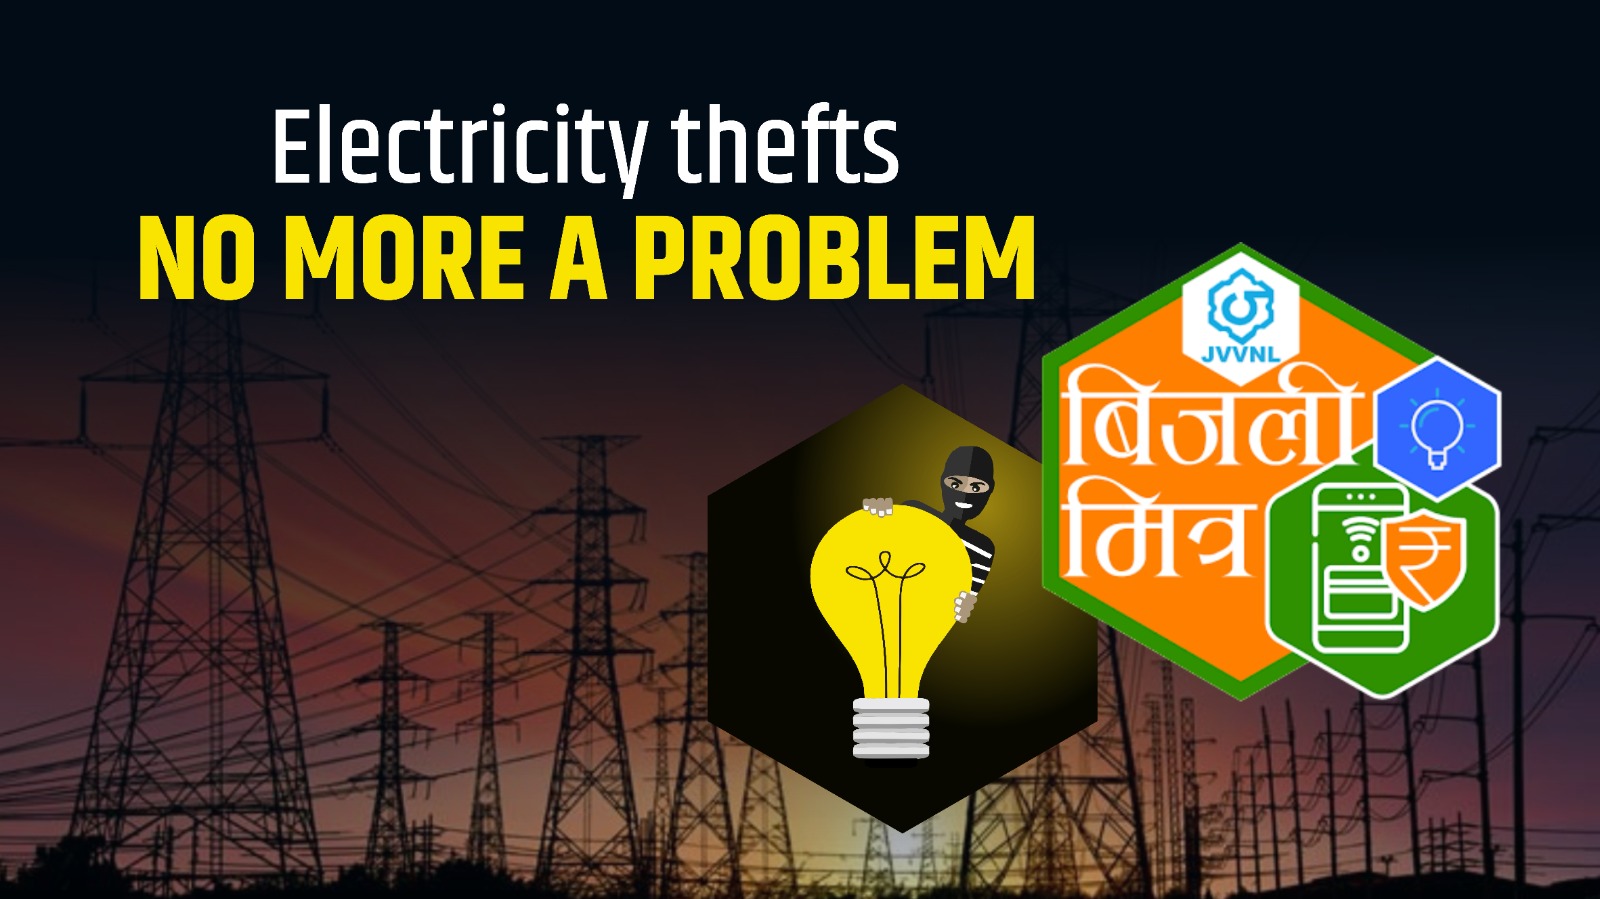 Electricity thefts no more a problem